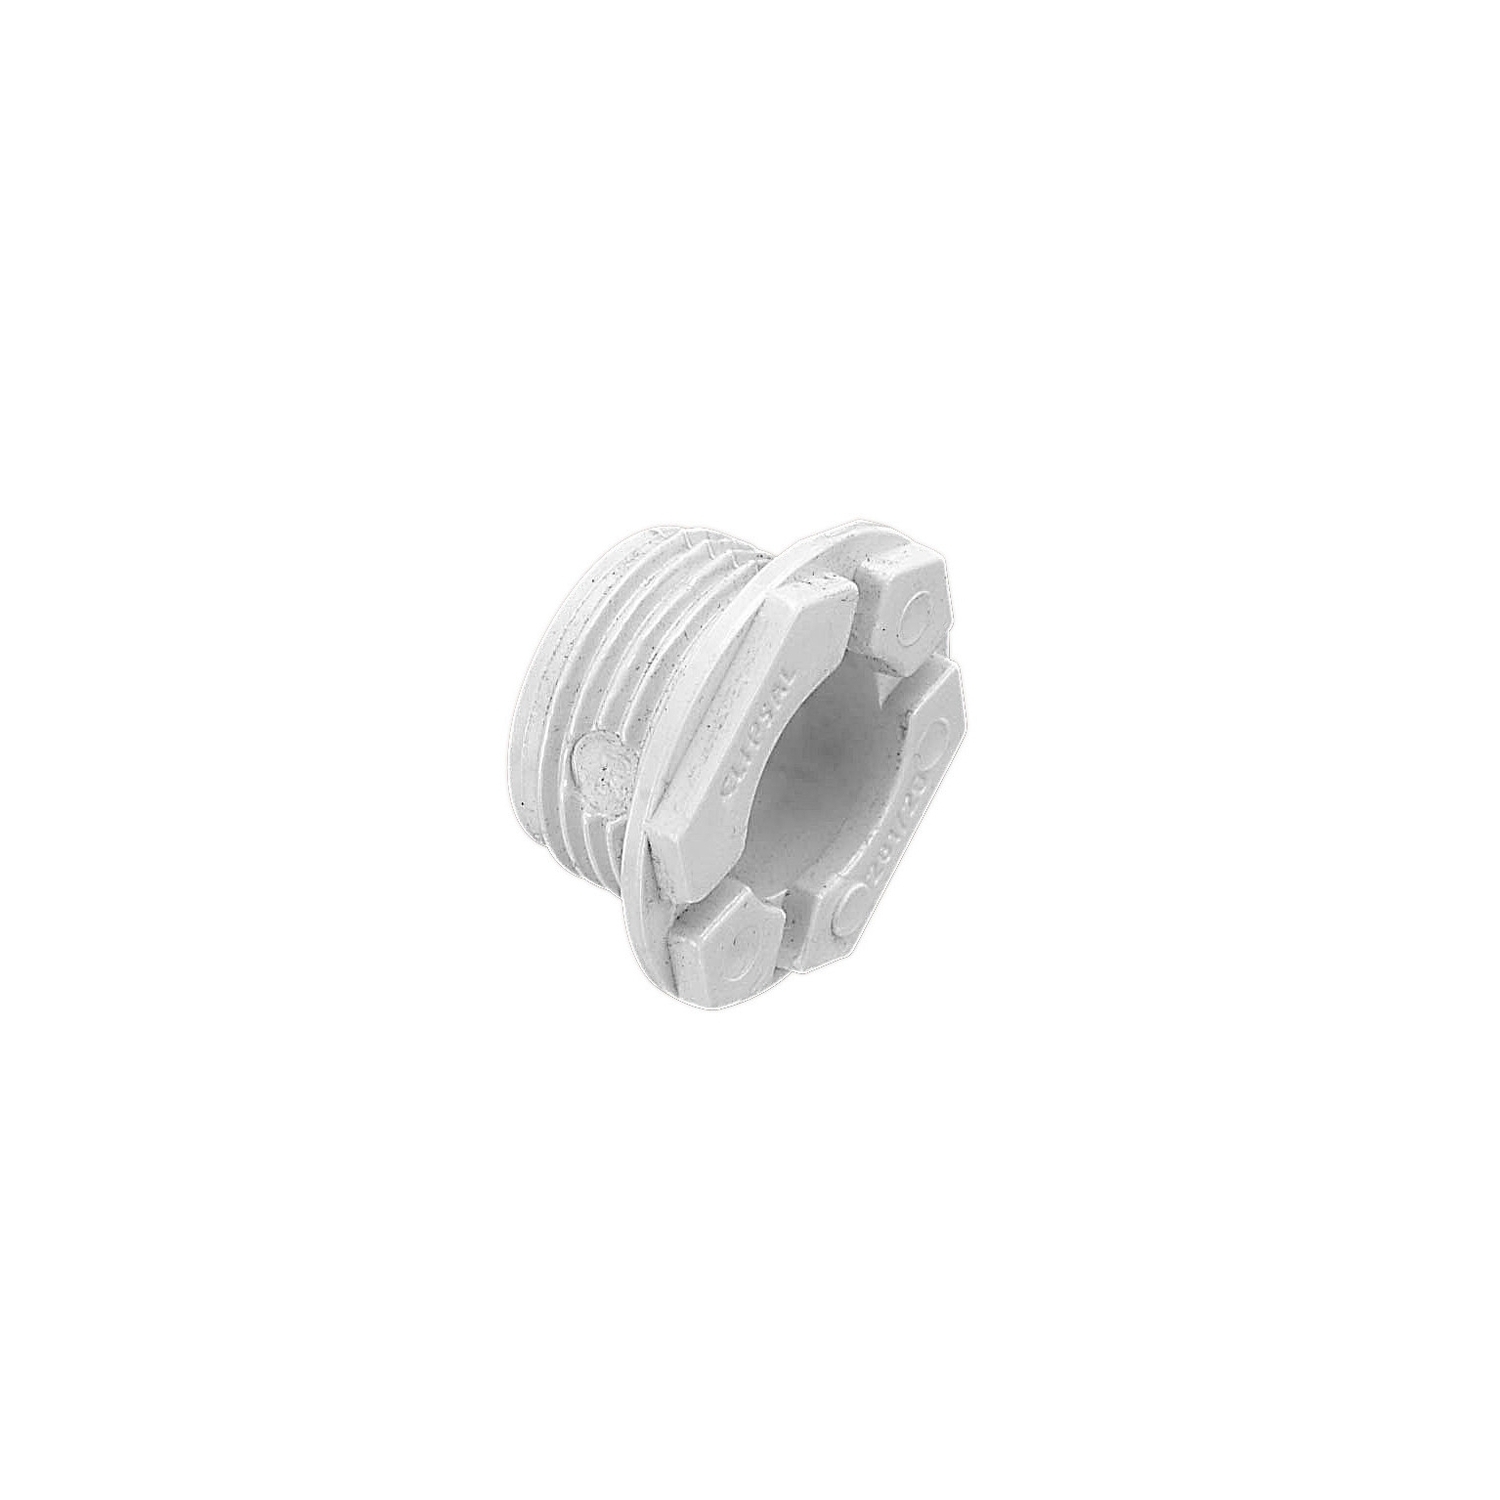 Solid Fittings - PVC, Male Bushes, 20mm, Grey